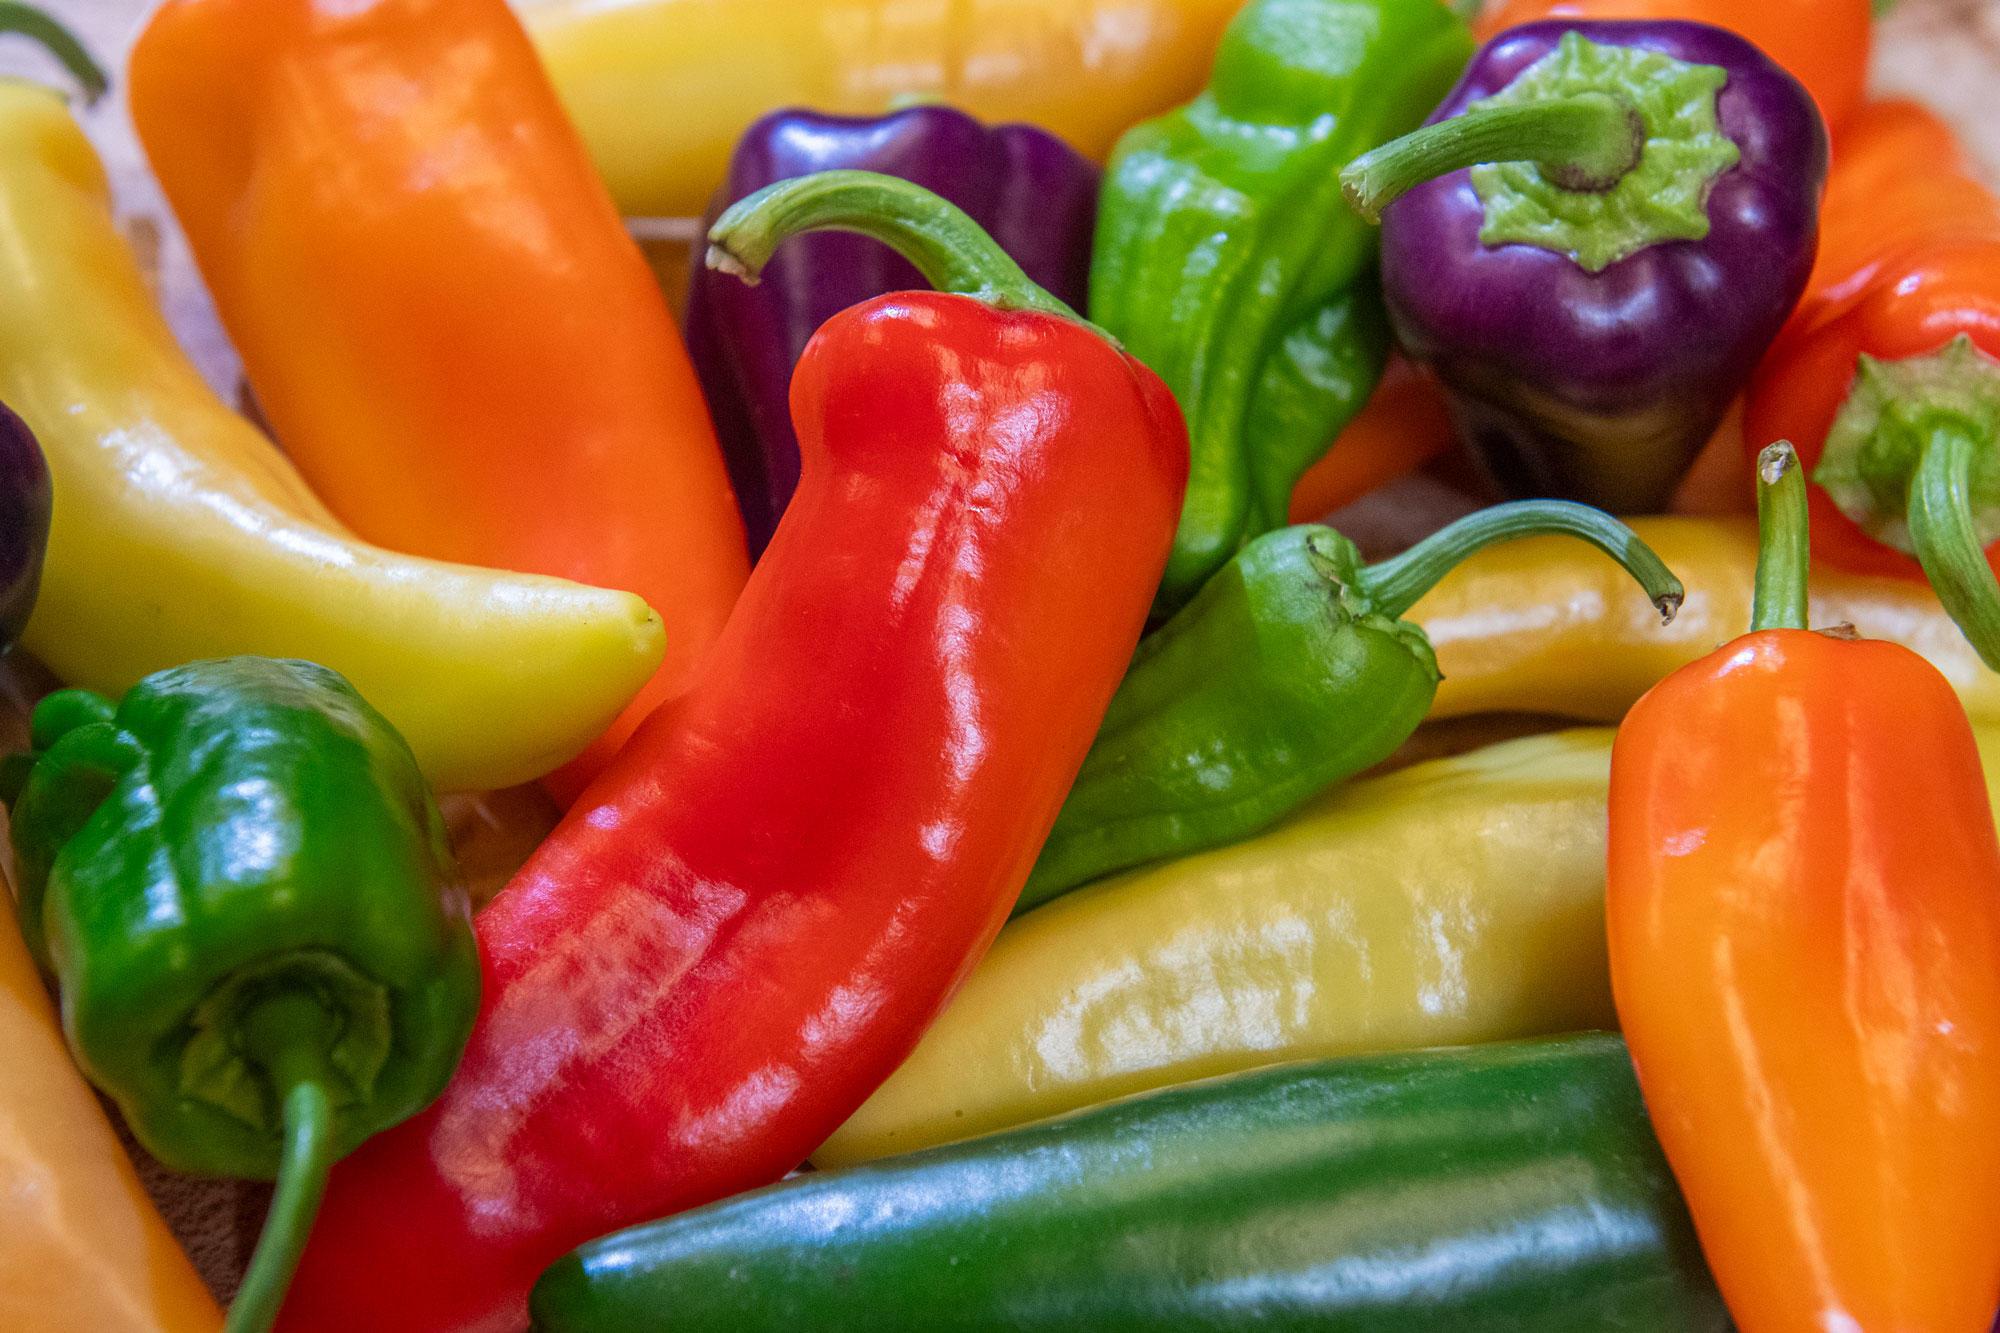 Growing peppers in maritime Northwest is more challenging than in Mexico, but it can be done.